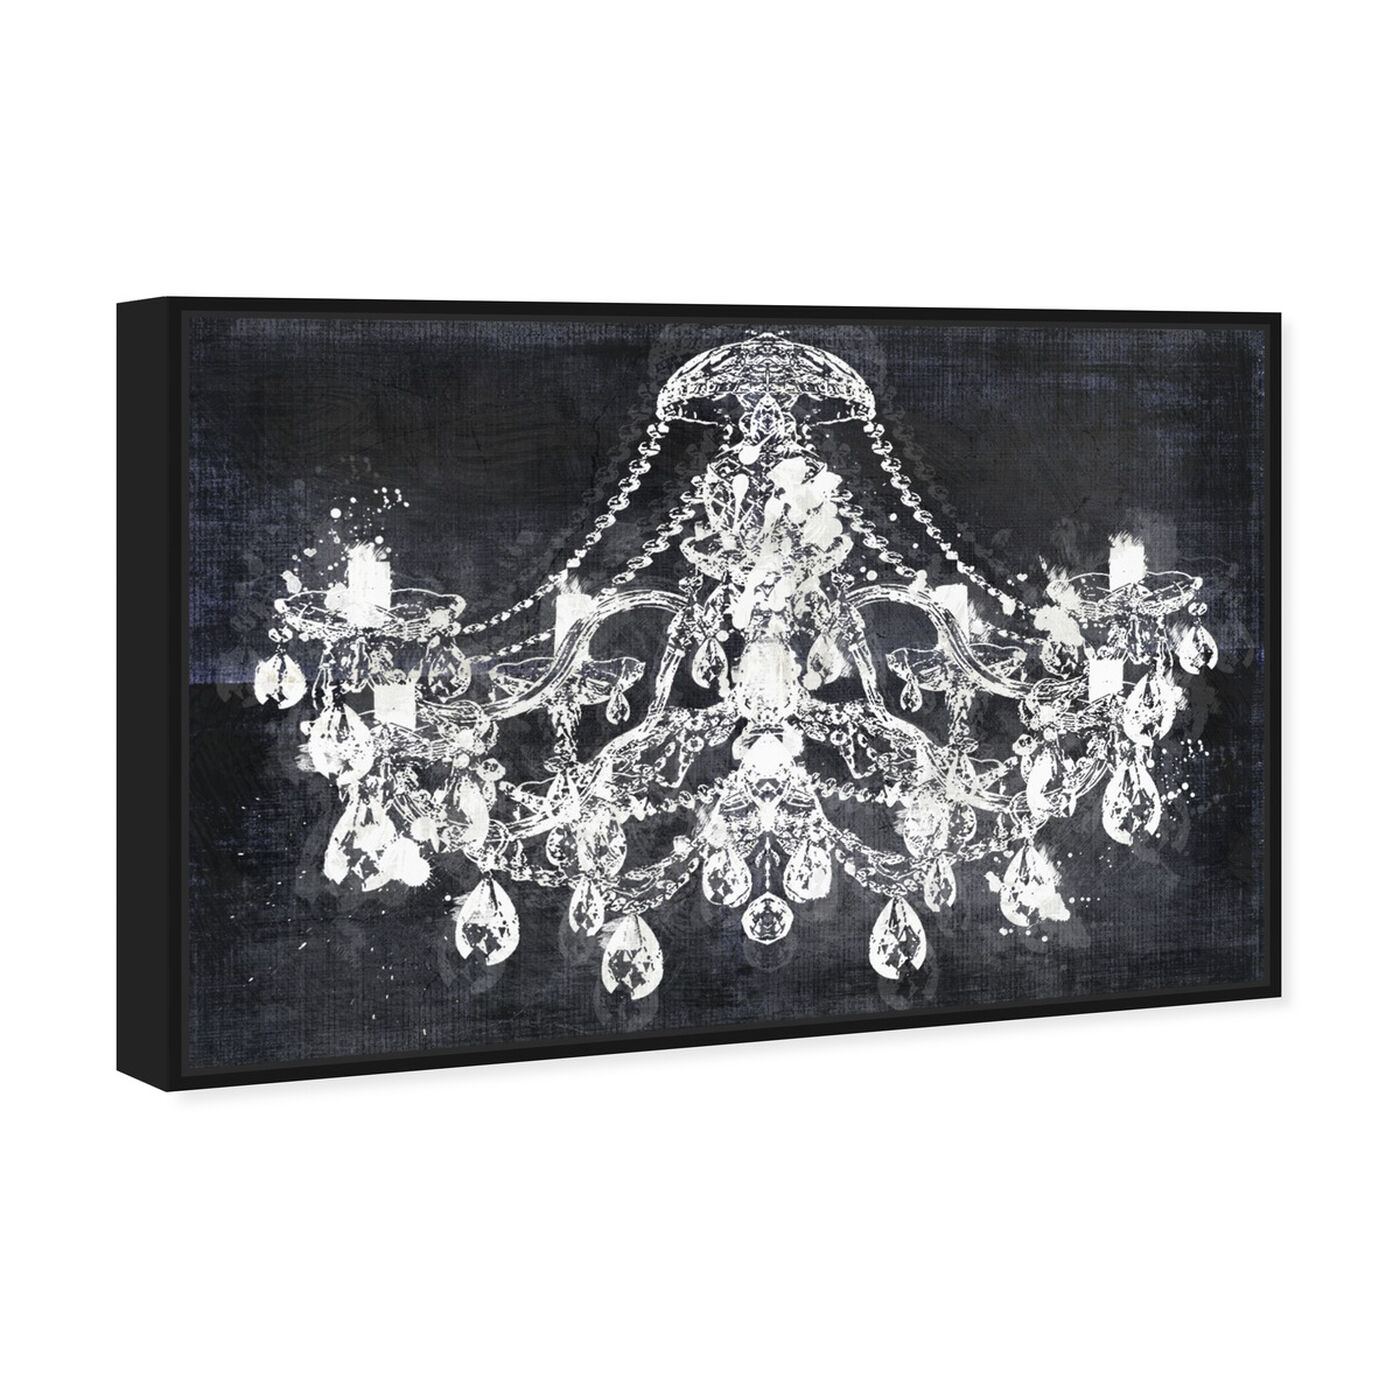 Angled view of Midnight Diamonds featuring fashion and glam and chandeliers art.